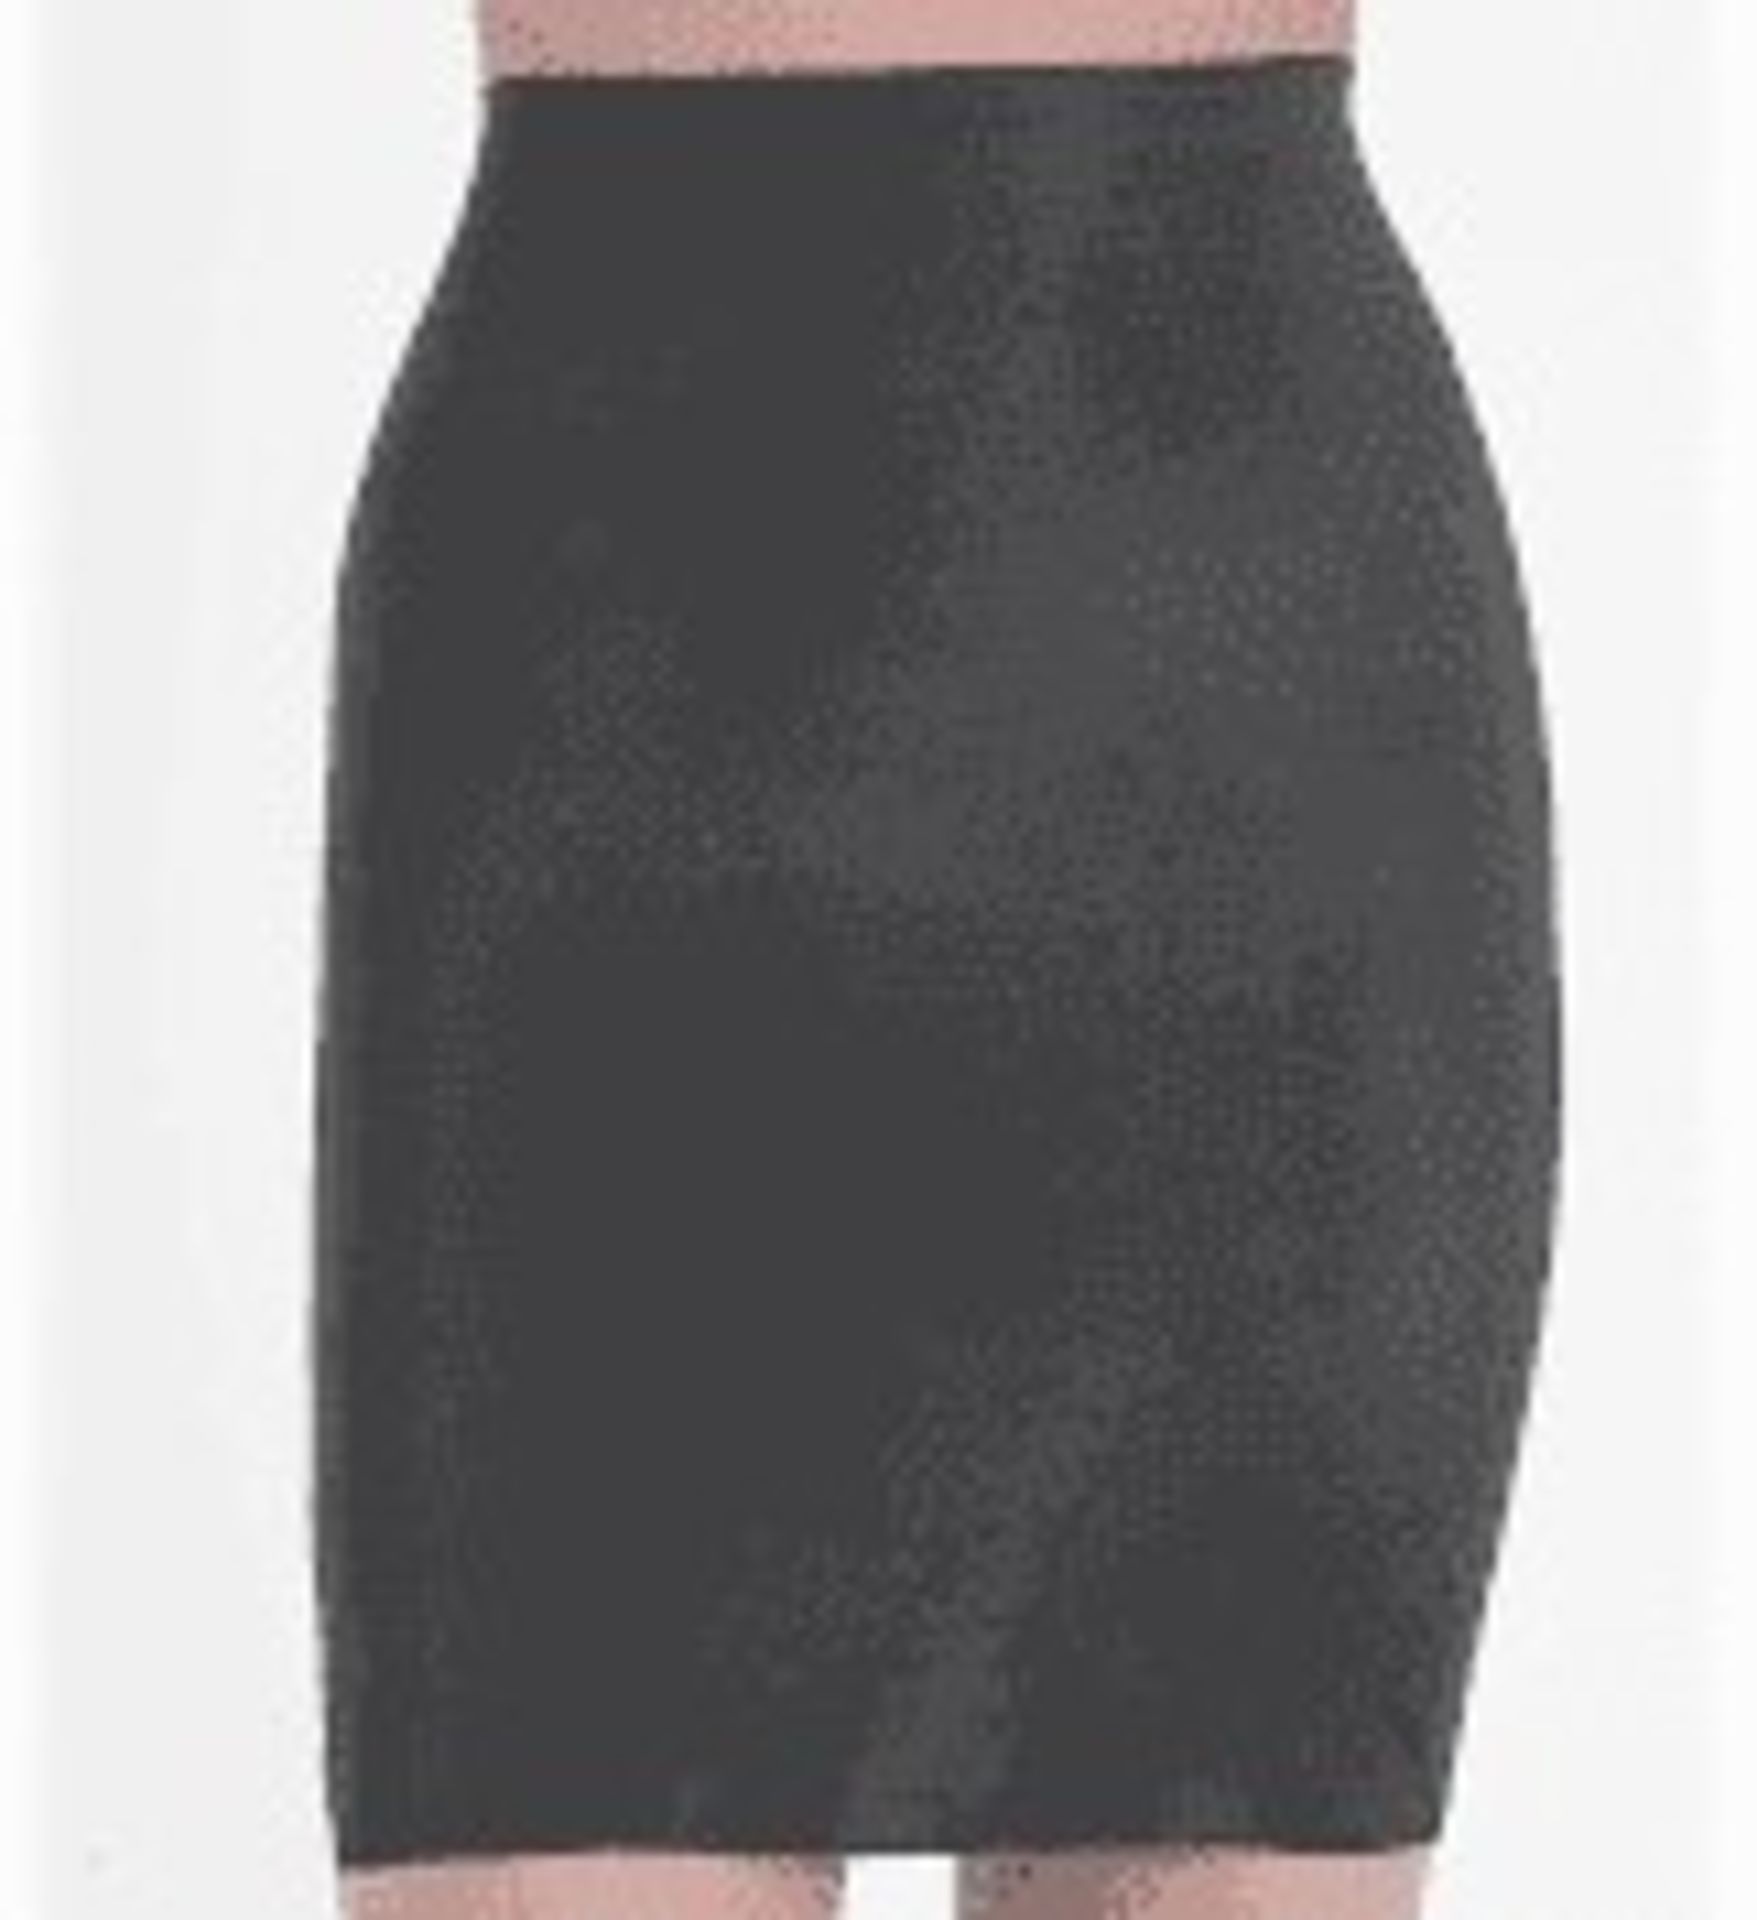 1 LOT TO CONTAIN 5 SPANX SKIRTS IN BACK DROP BLACK / SIZE XLARGE / STYLE 2174 / RRP £240.00 (